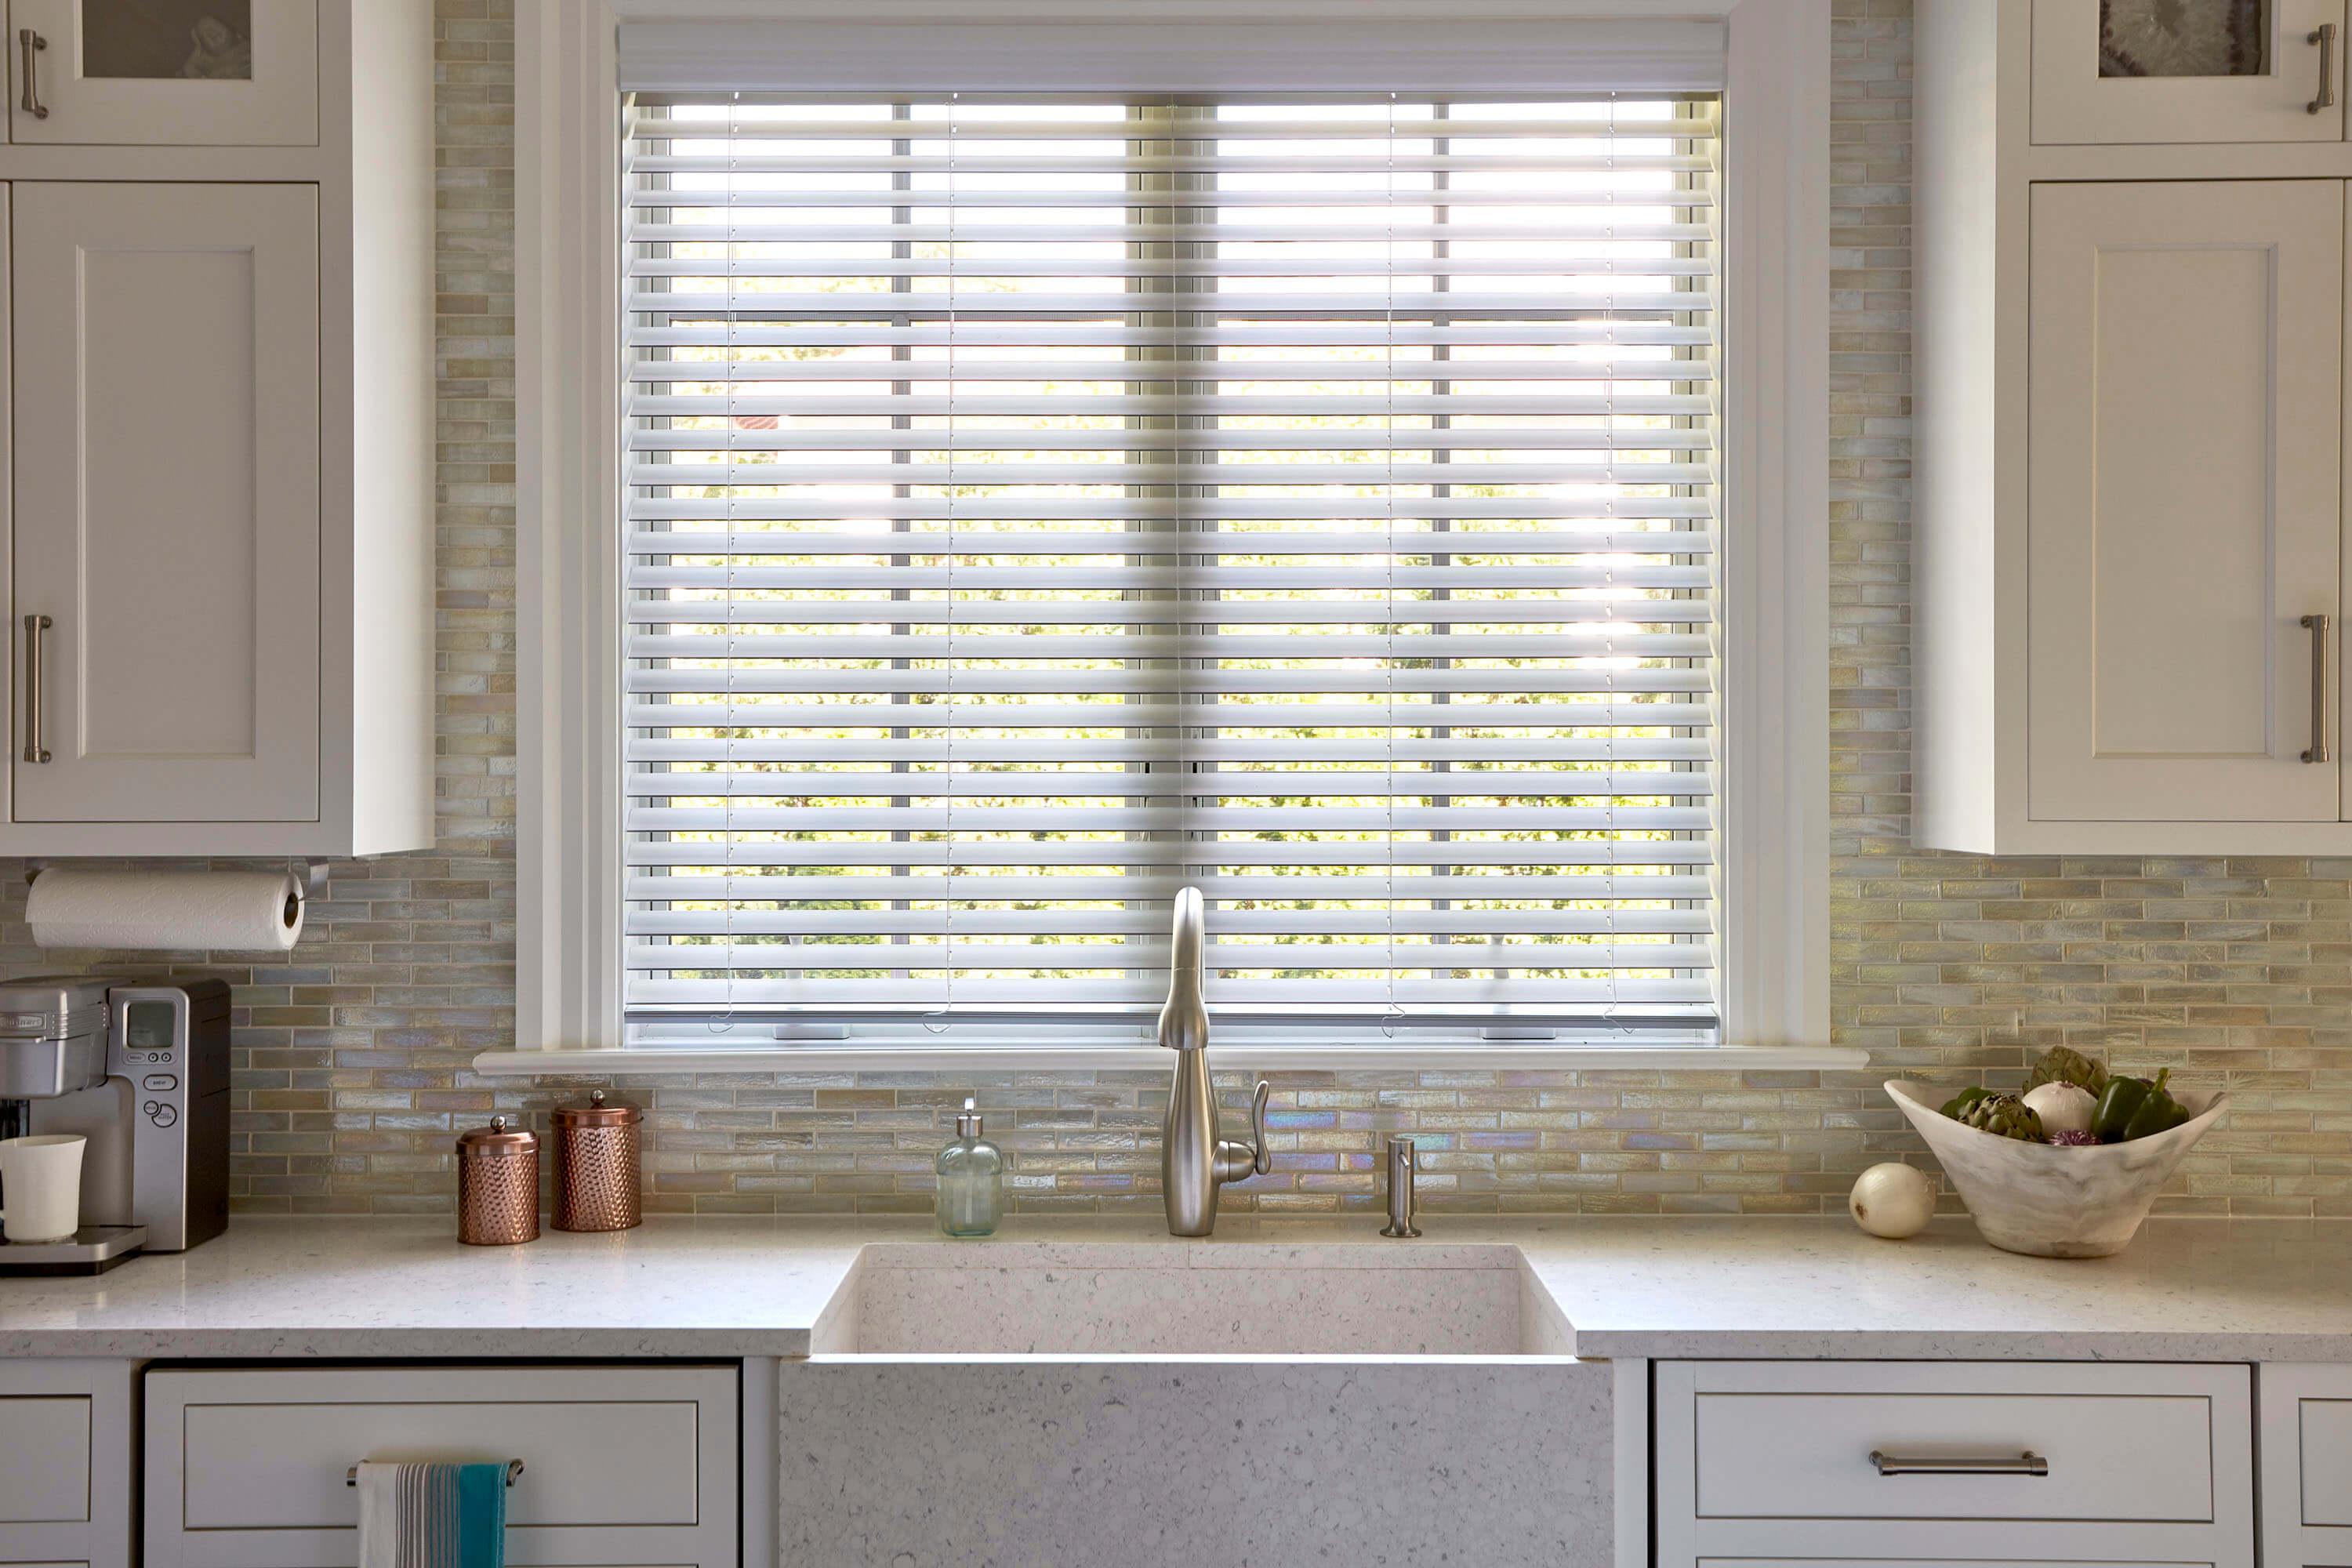 A modern kitchen with stylish white faux wood window blinds on the window above the sink